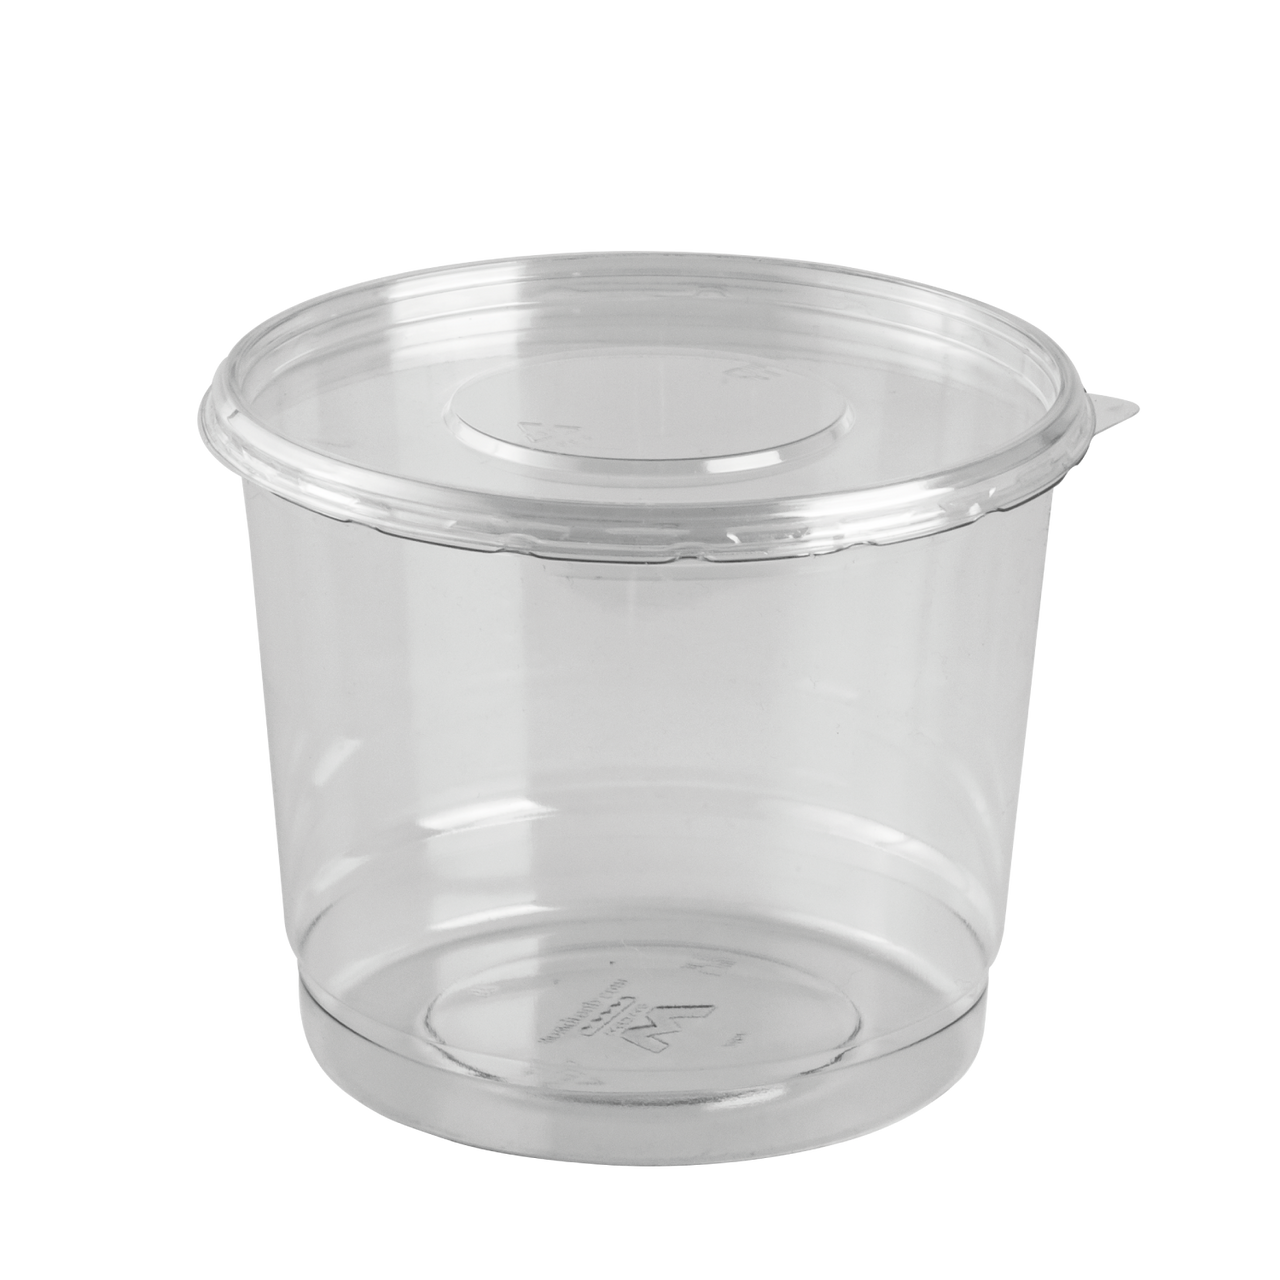 24oz DELI CONTAINER WITH LID - 5 x 4 TALL - 250/CASE - Wow